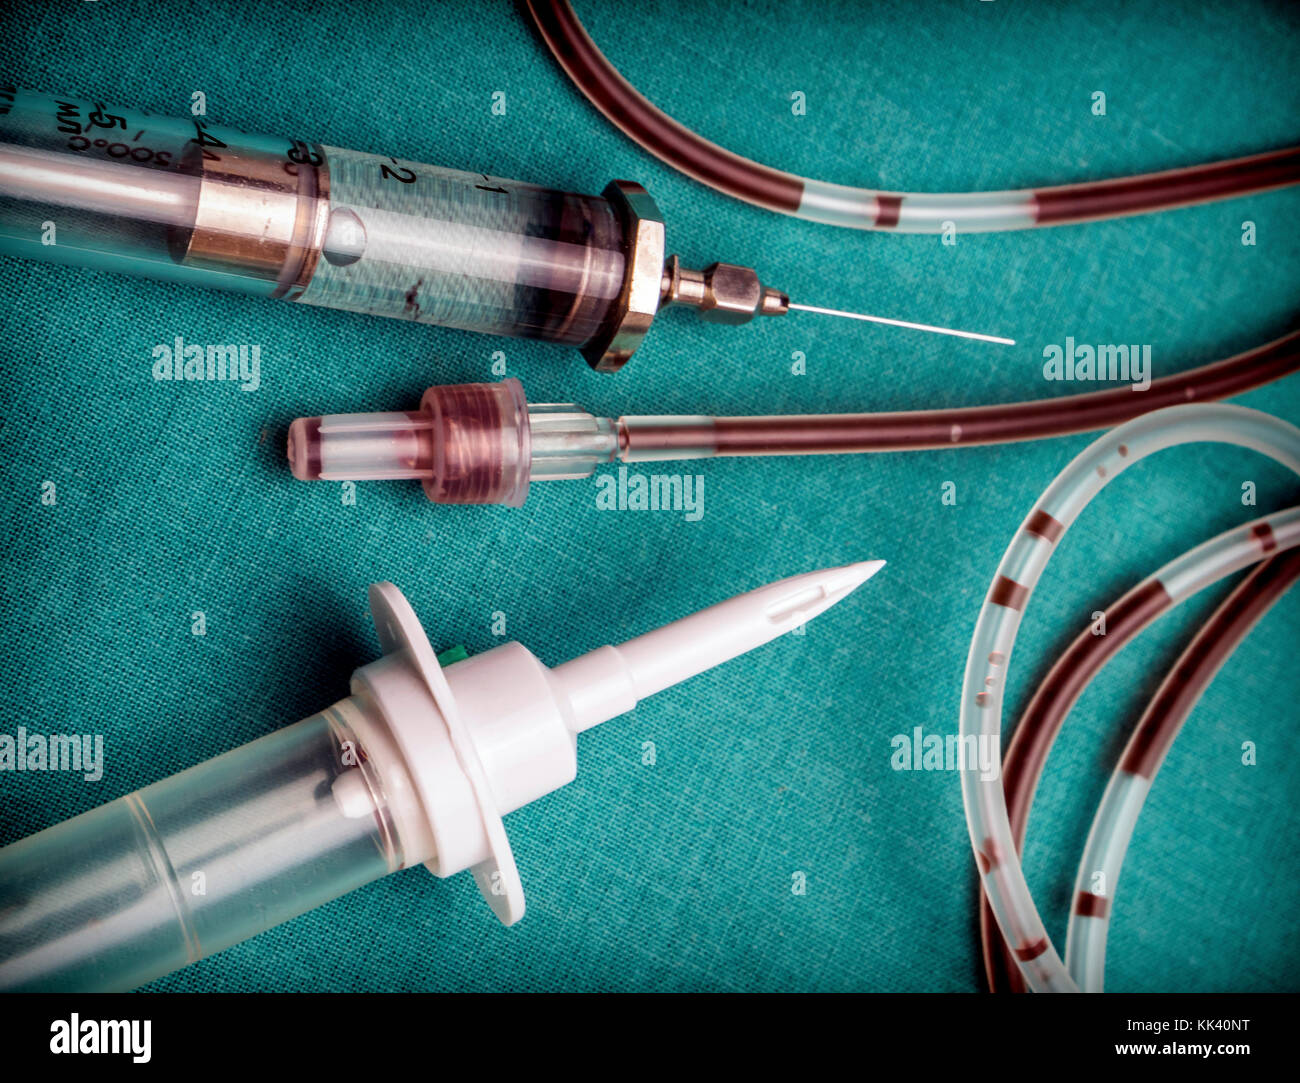 Drip irrigation system with traces of blood and vintage syringe, conceptual image Stock Photo